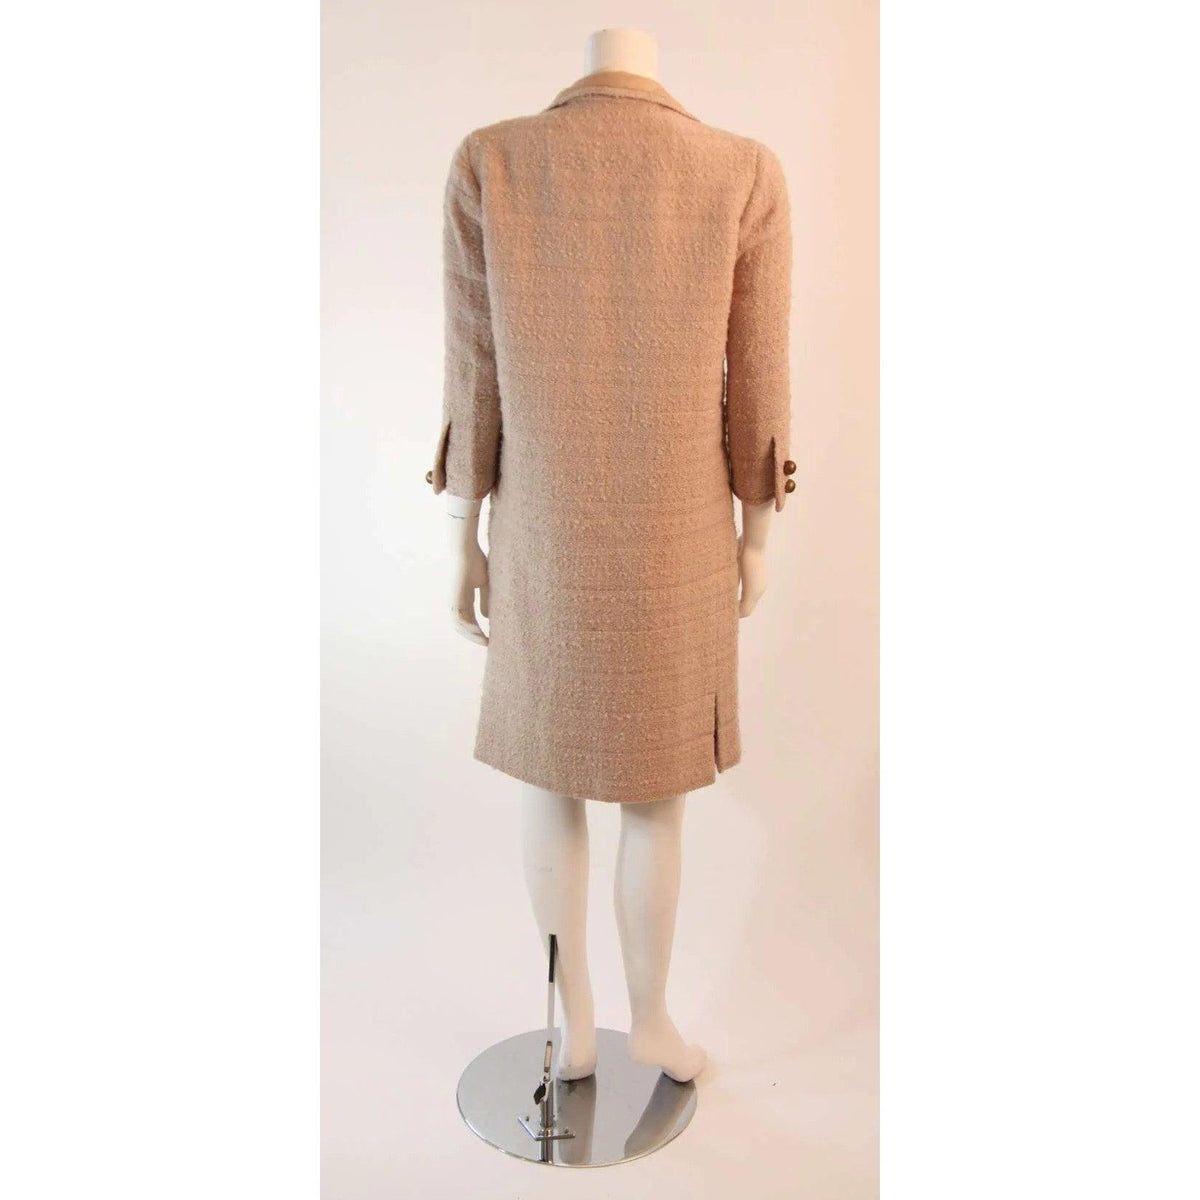 Chanel 1960s Attributed to Chanel Cream Boucle 3 PC Tweed Suit | Size 37